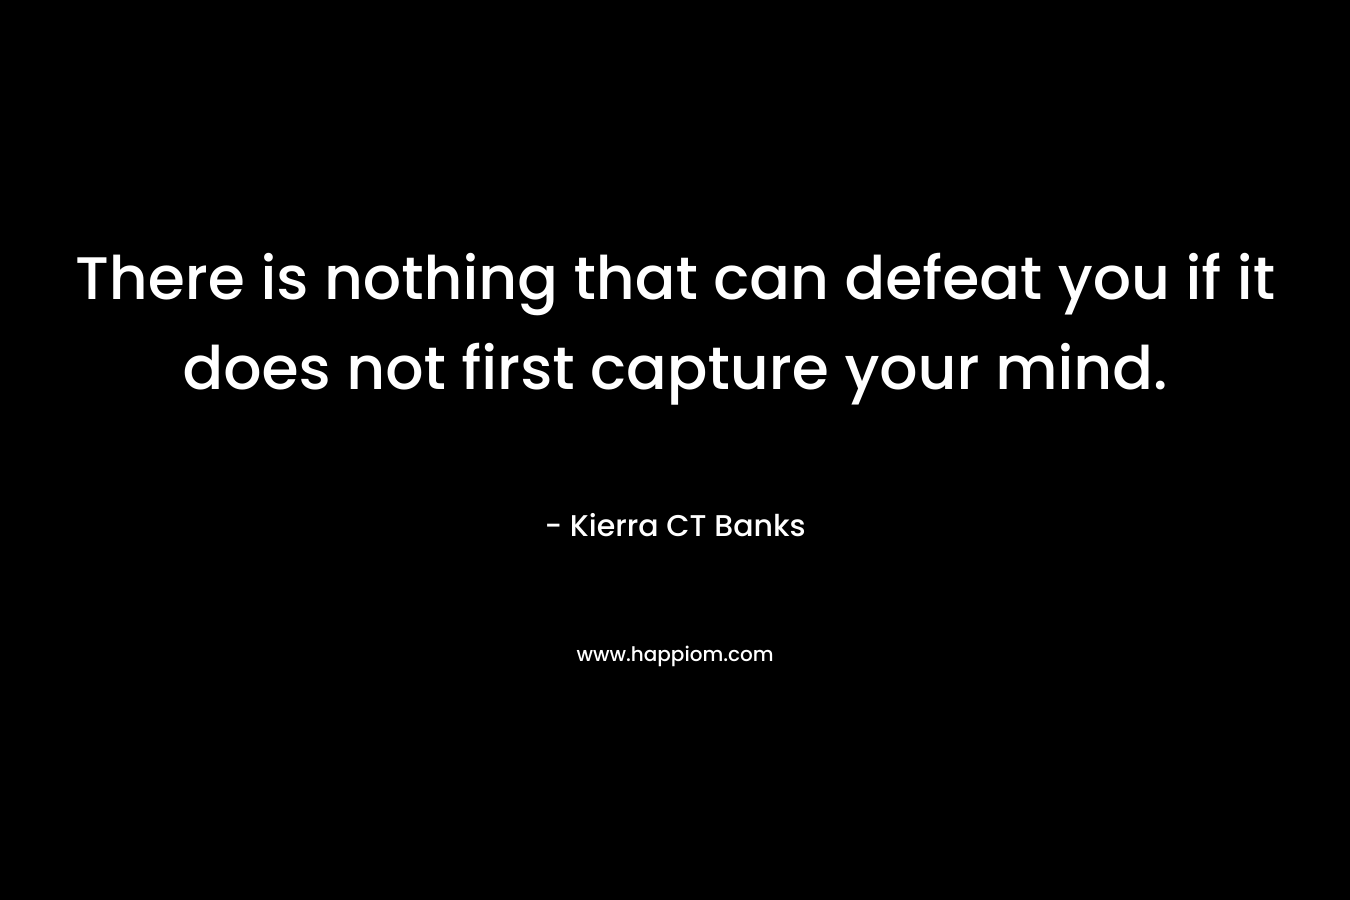 There is nothing that can defeat you if it does not first capture your mind. – Kierra CT Banks